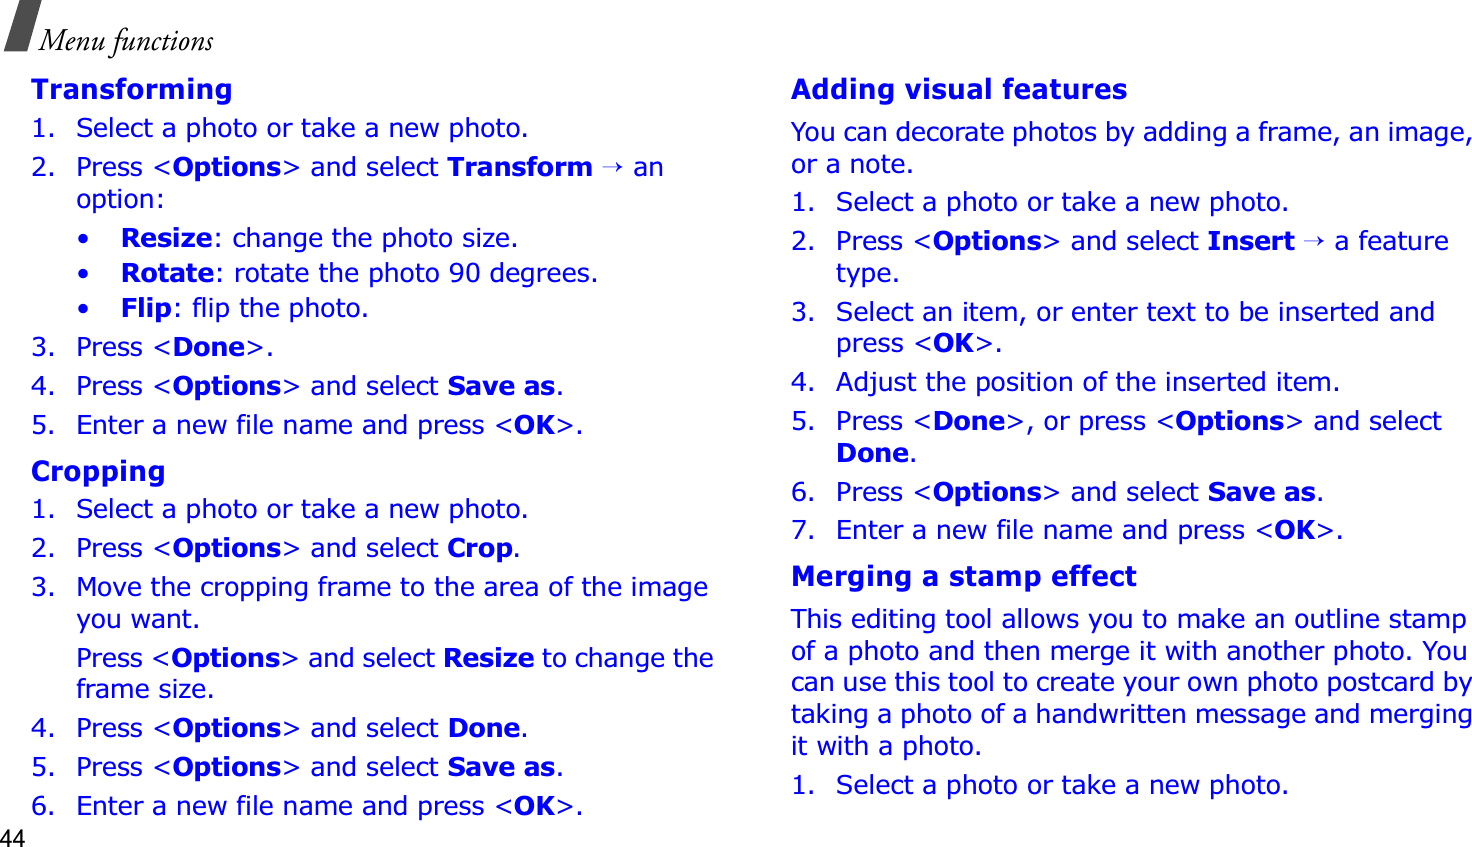 44Menu functionsTransforming1. Select a photo or take a new photo.2. Press &lt;Options&gt; and select Transform→ an option:•Resize: change the photo size.•Rotate: rotate the photo 90 degrees.•Flip: flip the photo.3. Press &lt;Done&gt;.4. Press &lt;Options&gt; and select Save as.5. Enter a new file name and press &lt;OK&gt;. Cropping1. Select a photo or take a new photo.2. Press &lt;Options&gt; and select Crop.3. Move the cropping frame to the area of the image you want. Press &lt;Options&gt; and select Resize to change the frame size.4. Press &lt;Options&gt; and select Done.5. Press &lt;Options&gt; and select Save as.6. Enter a new file name and press &lt;OK&gt;. Adding visual featuresYou can decorate photos by adding a frame, an image, or a note.1. Select a photo or take a new photo.2. Press &lt;Options&gt; and select Insert→ a feature type.3. Select an item, or enter text to be inserted and press &lt;OK&gt;.4. Adjust the position of the inserted item.5. Press &lt;Done&gt;, or press &lt;Options&gt; and select Done.6. Press &lt;Options&gt; and select Save as.7. Enter a new file name and press &lt;OK&gt;. Merging a stamp effectThis editing tool allows you to make an outline stamp of a photo and then merge it with another photo. You can use this tool to create your own photo postcard by taking a photo of a handwritten message and merging it with a photo.1. Select a photo or take a new photo.